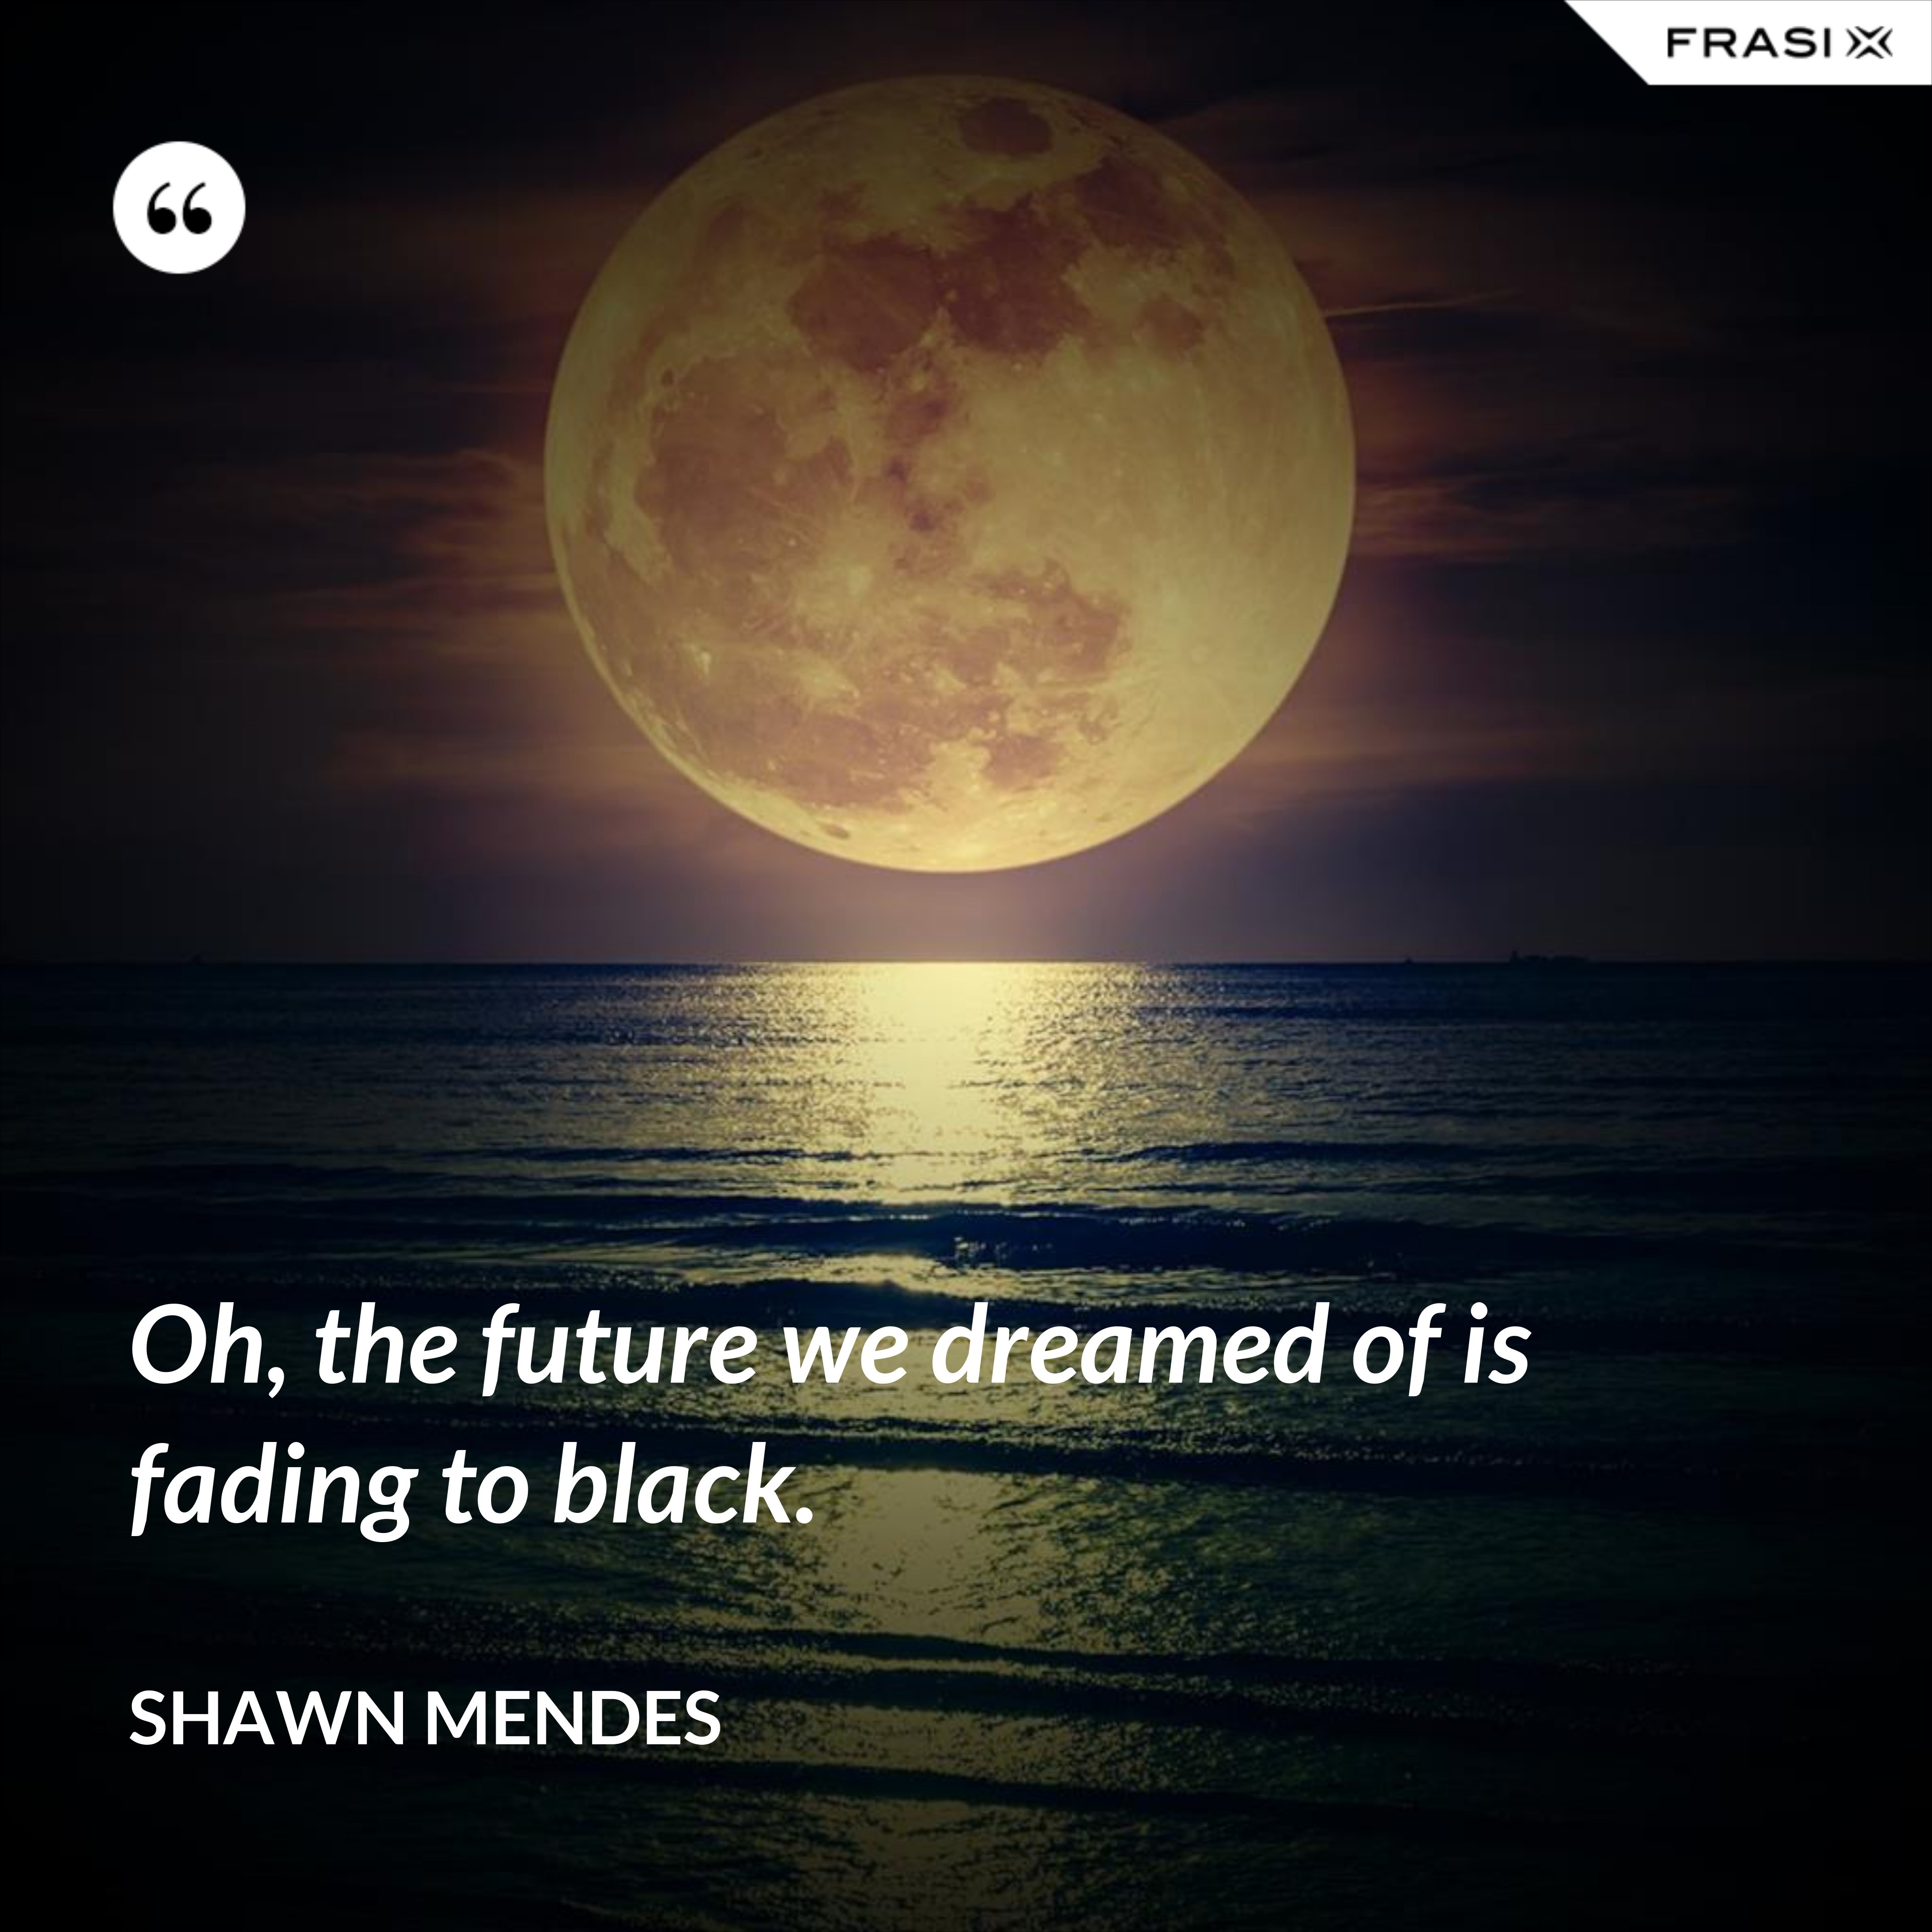 Oh, the future we dreamed of is fading to black. - Shawn Mendes